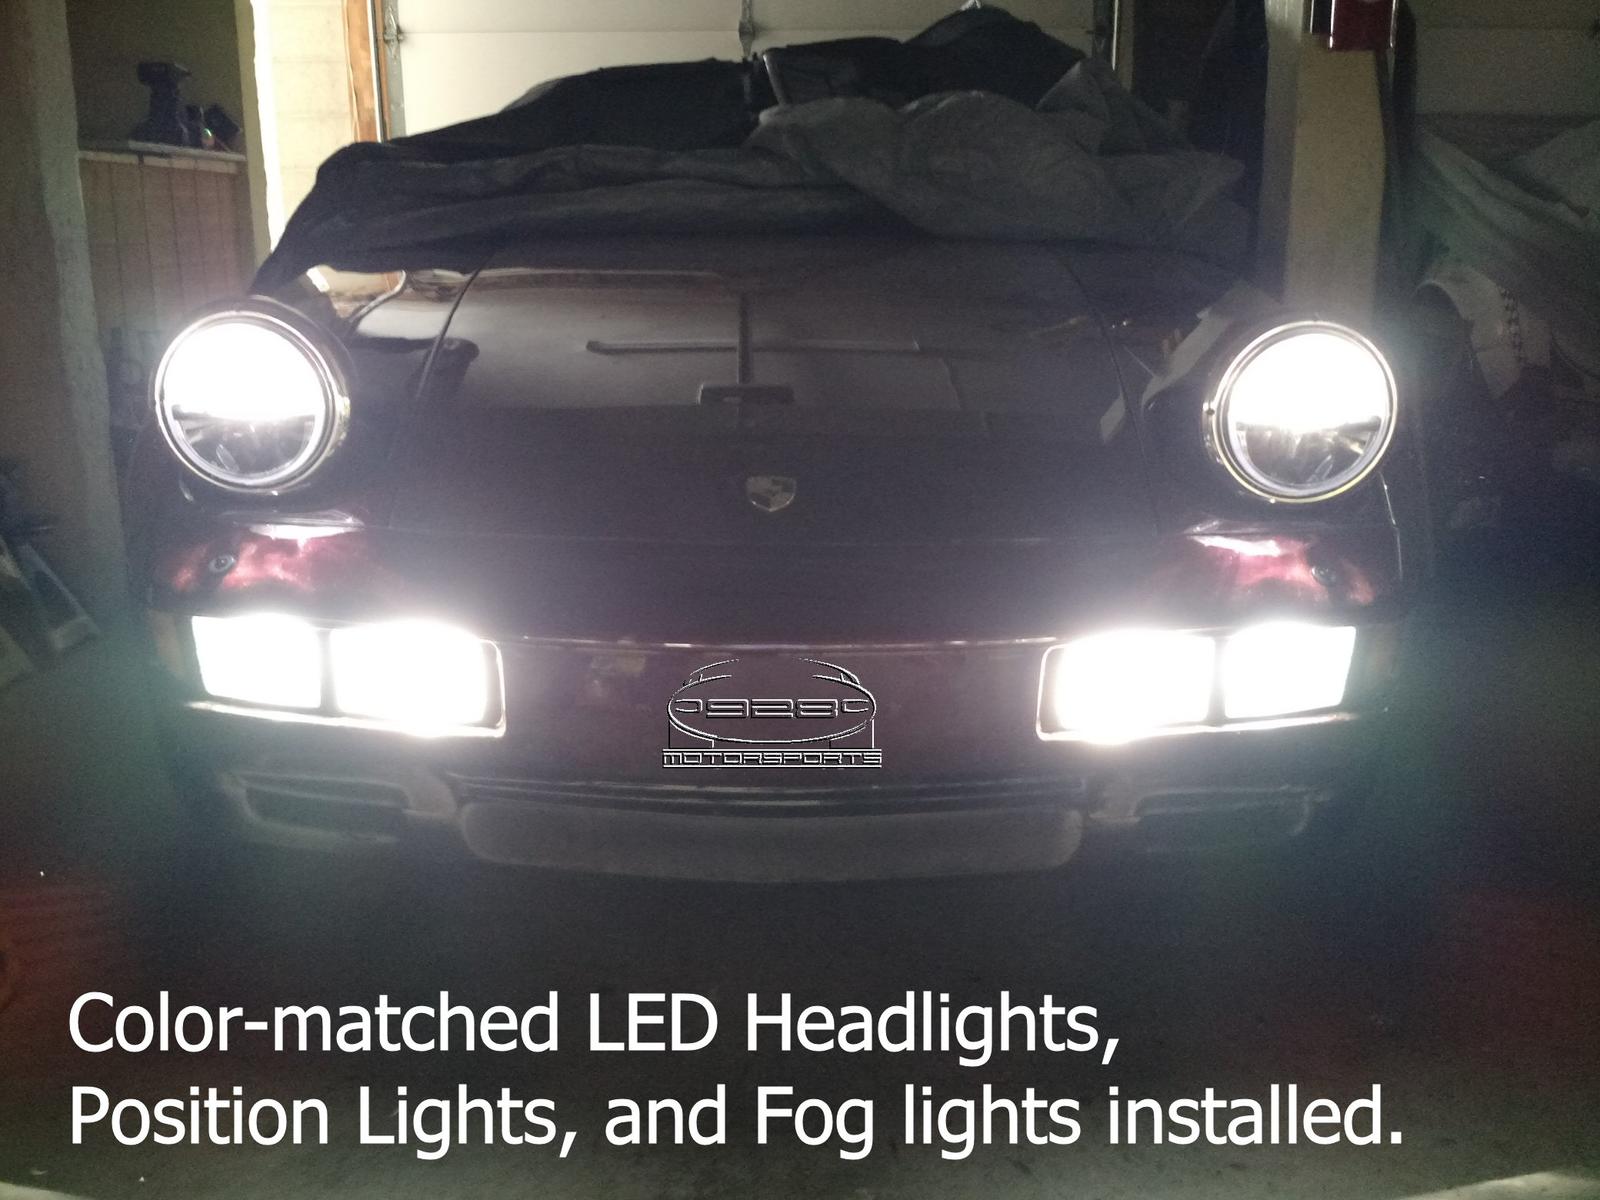 New LED Bulbs for the 928 Fog and Position Lights in stock - Rennlist -  Porsche Discussion Forums